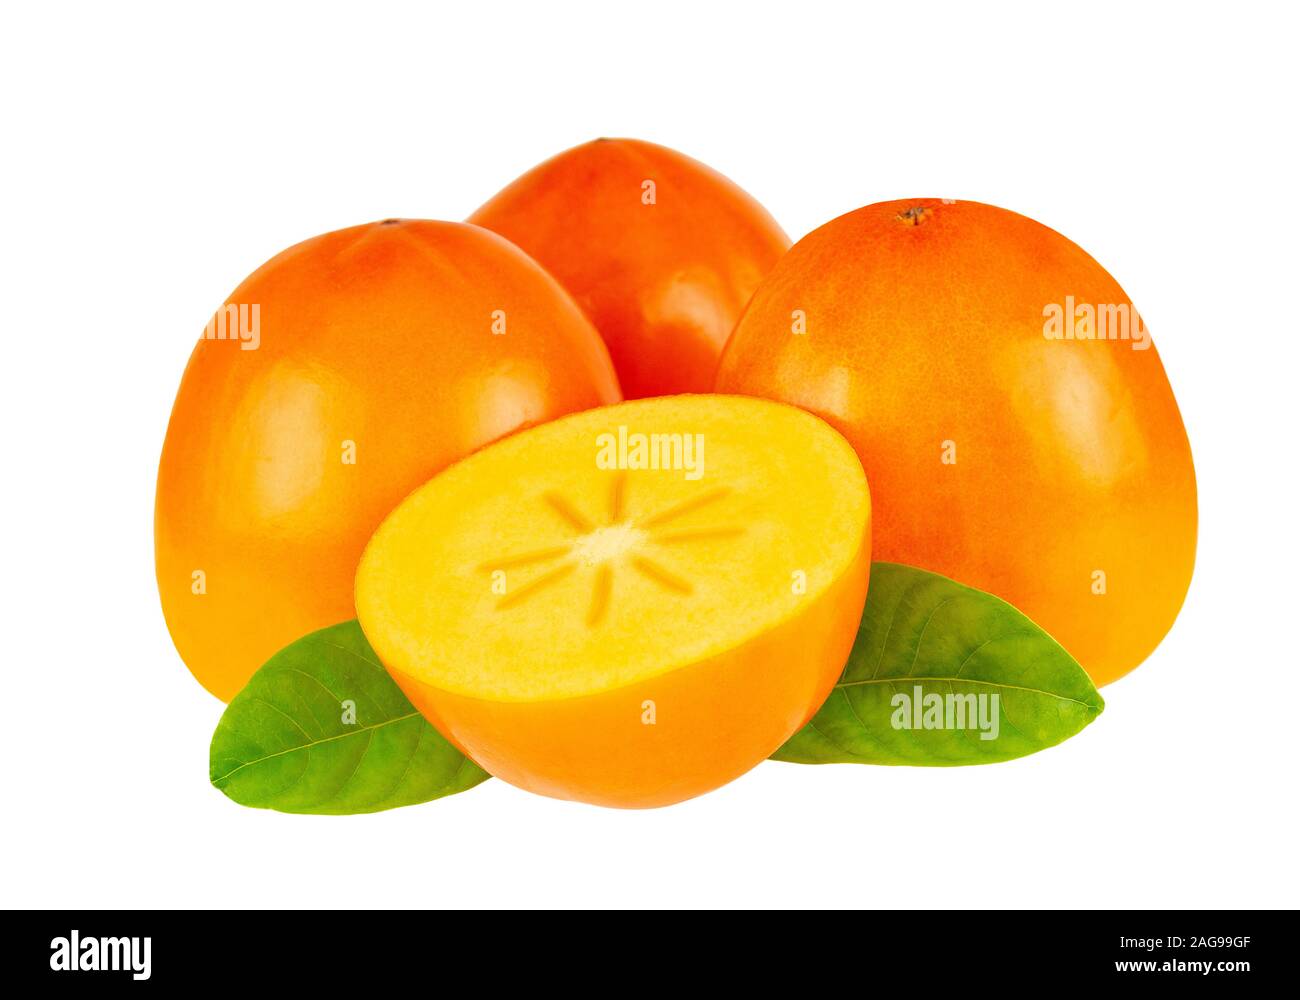 Persimmon Whole And Halved Fruit Isolated On White. Persimmon Closeup Retouched Image. Stock Photo